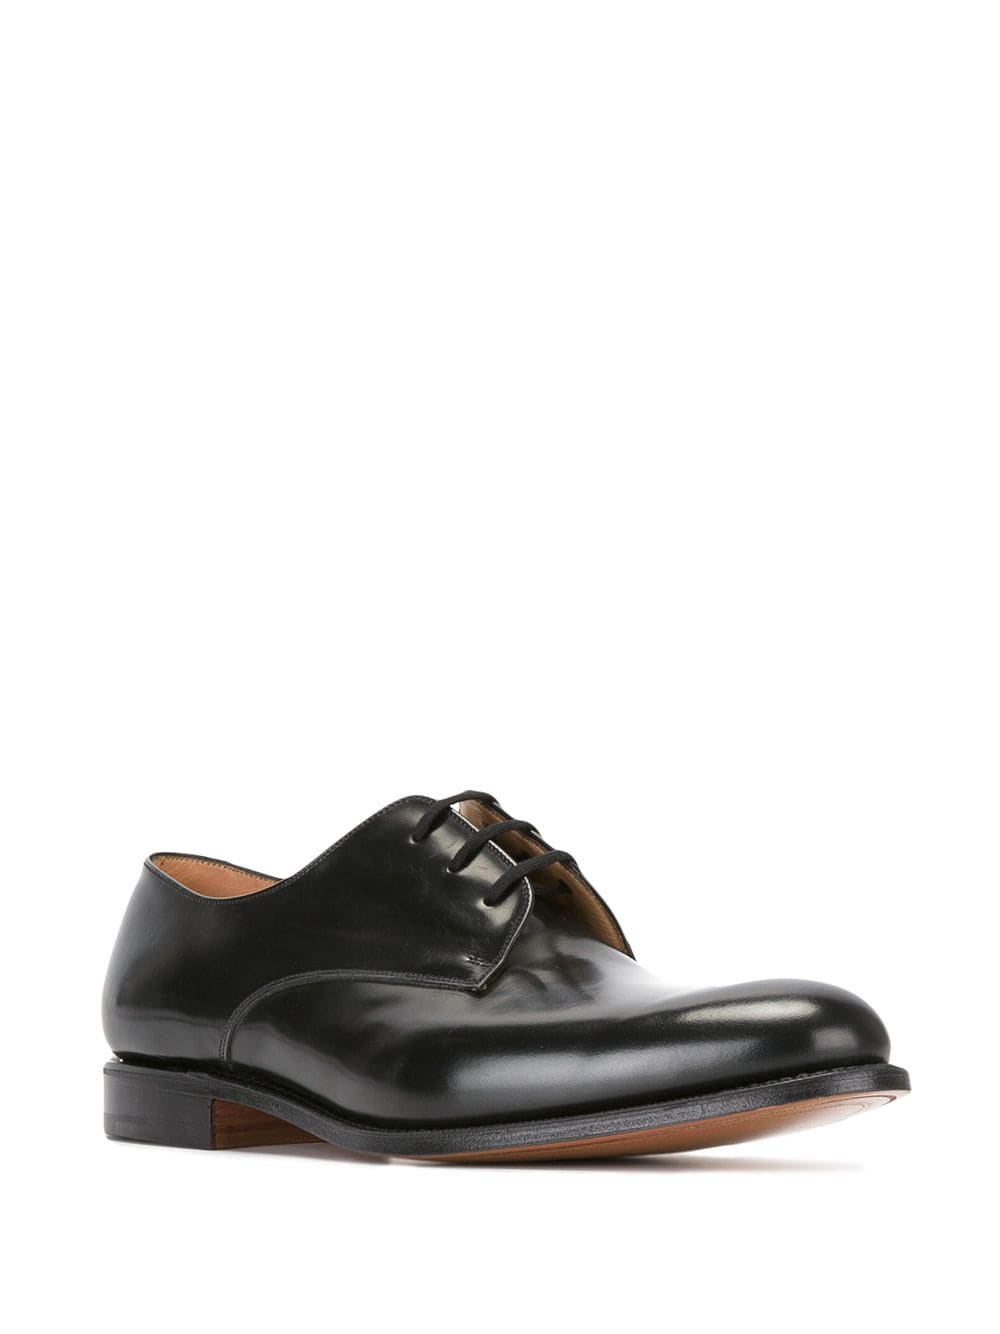 Image 2 of Church's Oslo Derby shoes